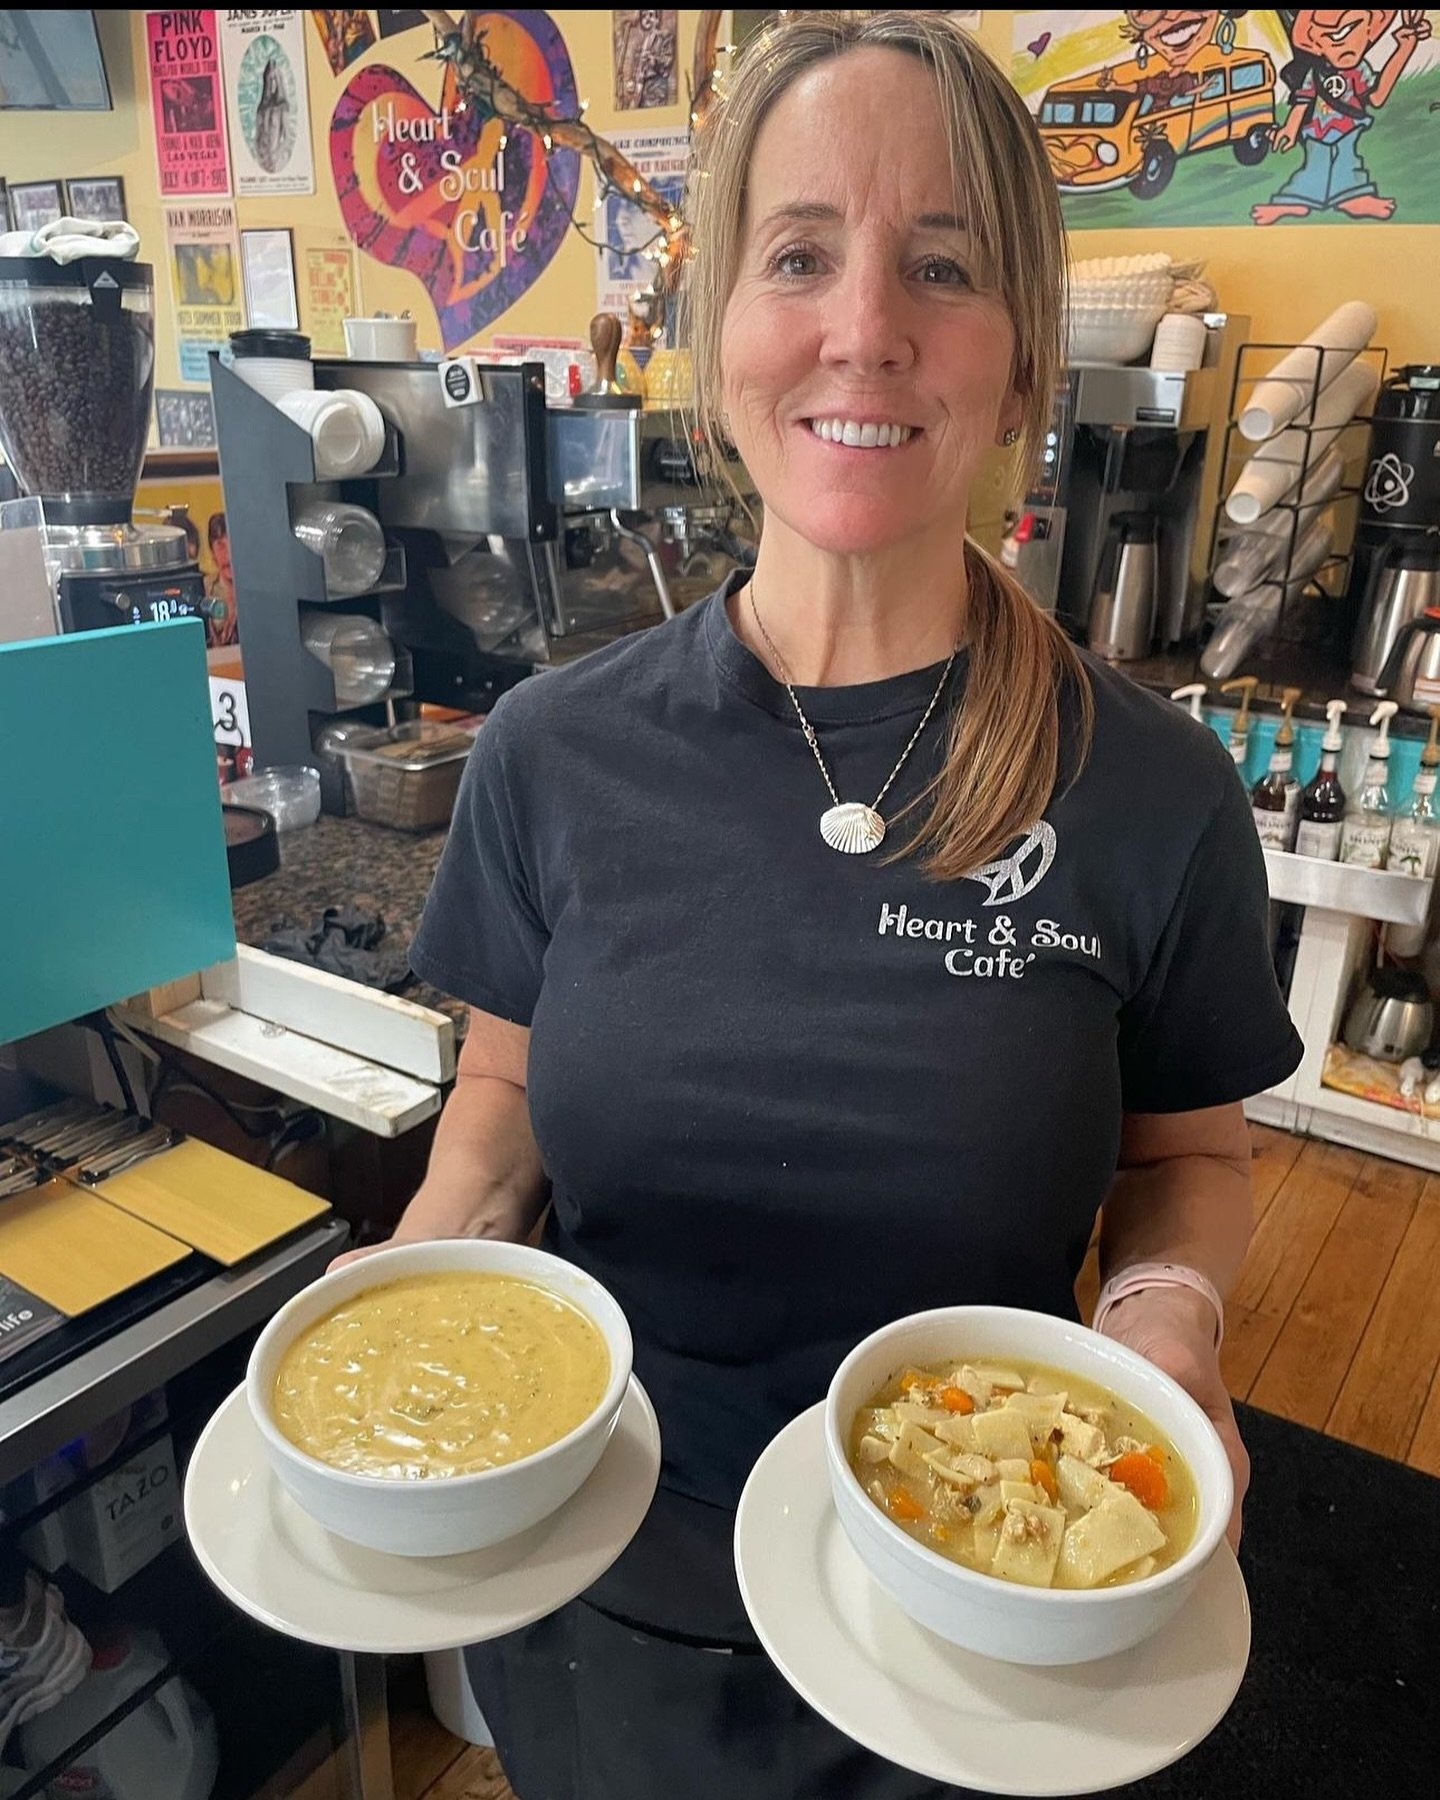 Our neighbor across the street &mdash; Julie at @heartandsoulsocial serving up some delicious food &amp; soups, and we are honored that she is also wearing some of our BFD bling! 💎 💫 👏🏻